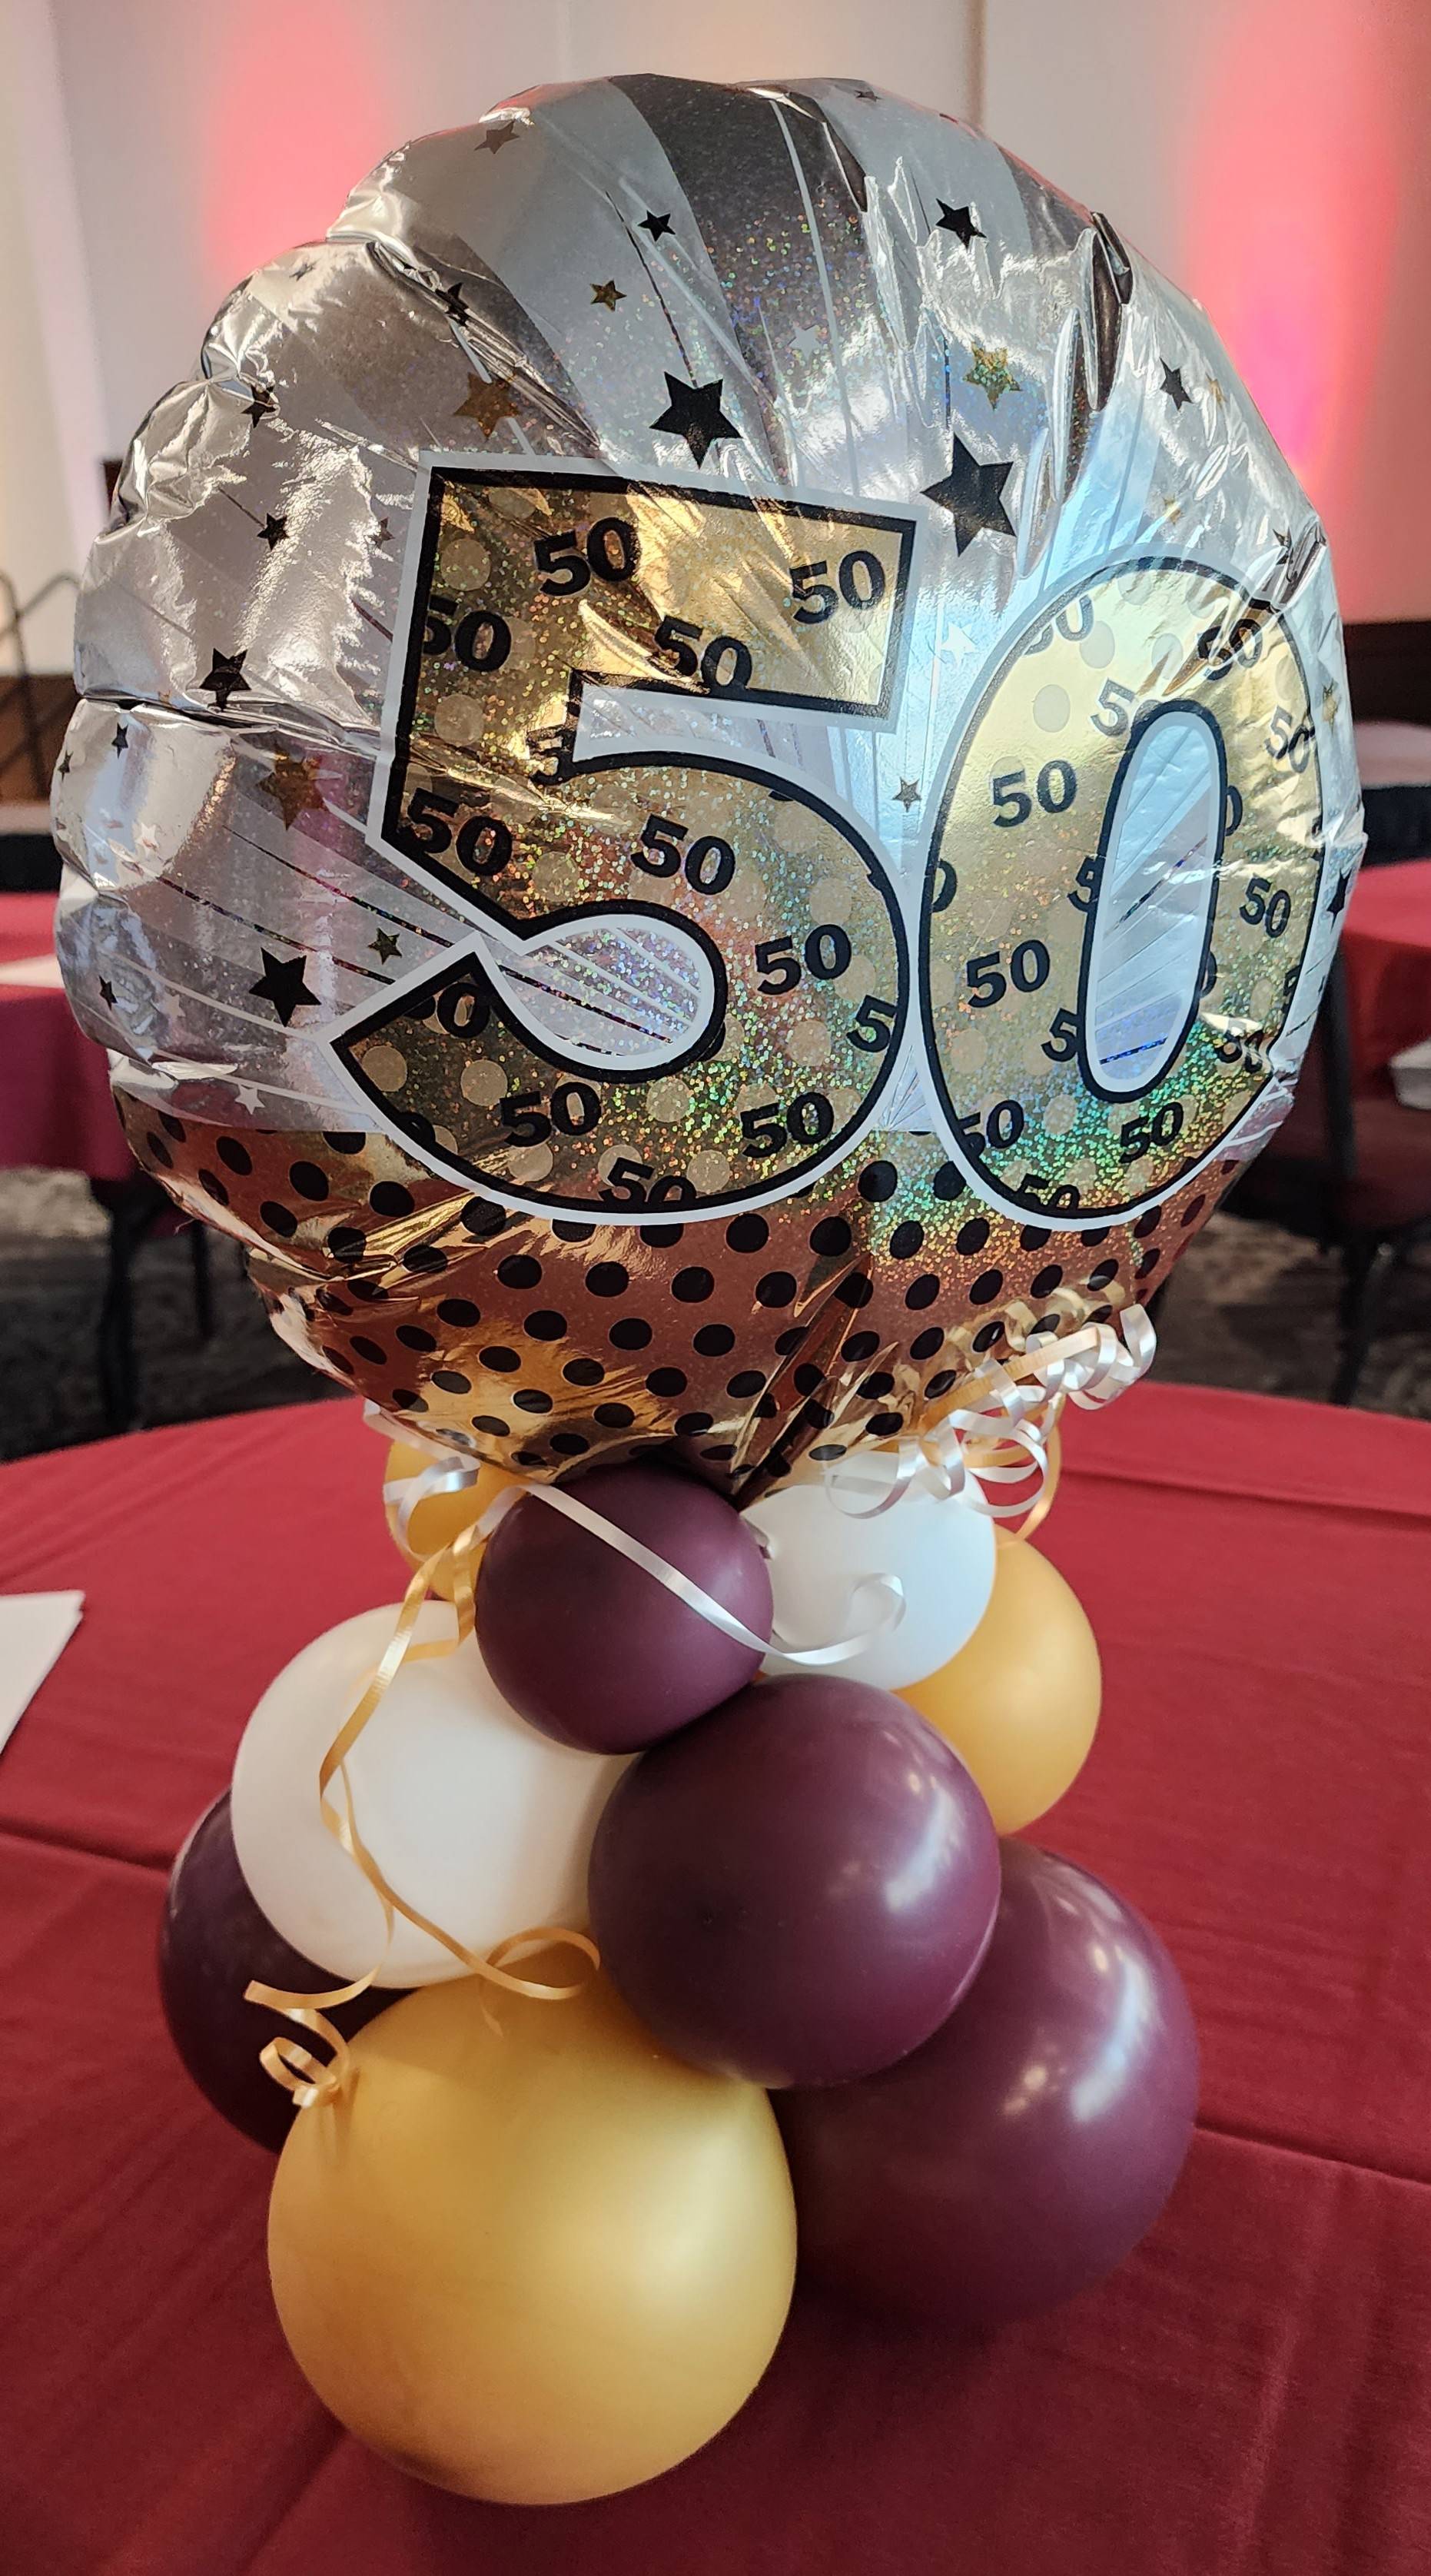 An arrangement of maroon, gold, and white balloons topped by a bigger balloon with the number 50 on it.